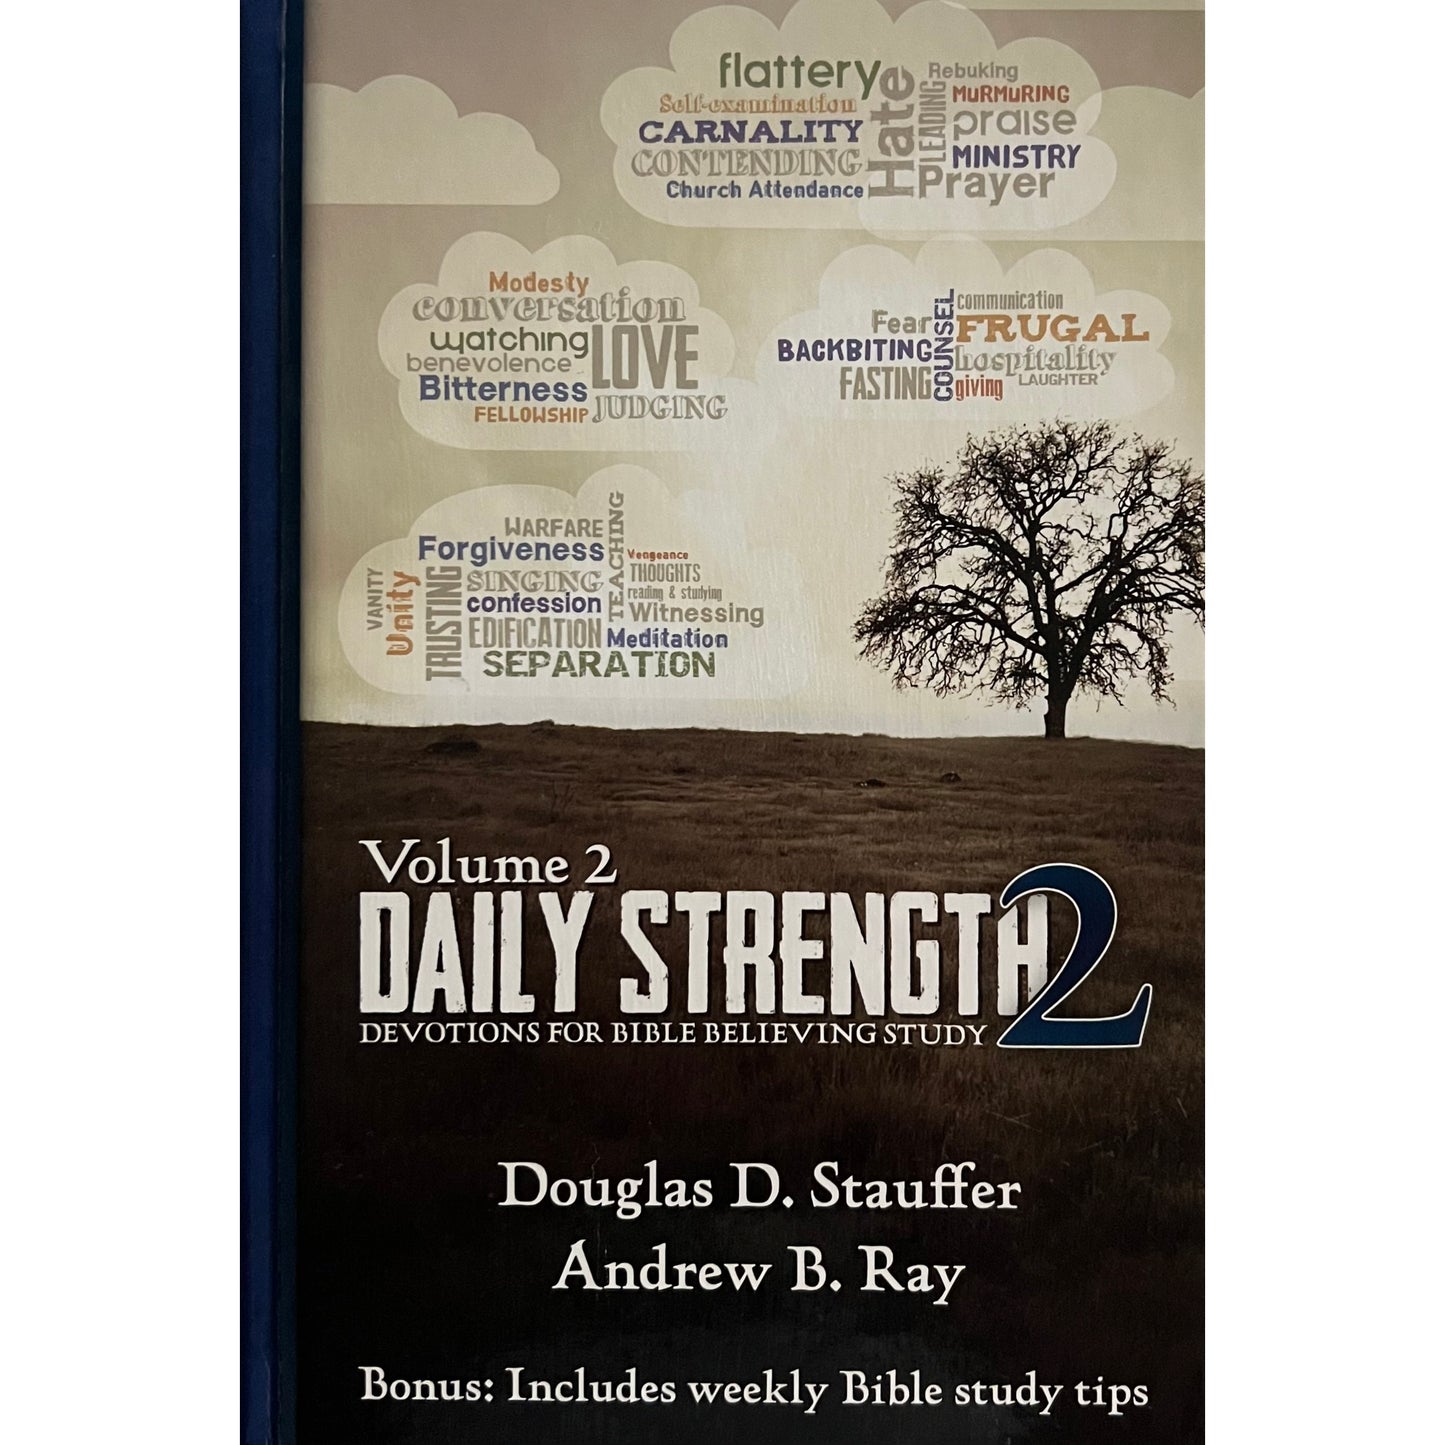 Daily Strength II: Devotions for Bible-Believing Study